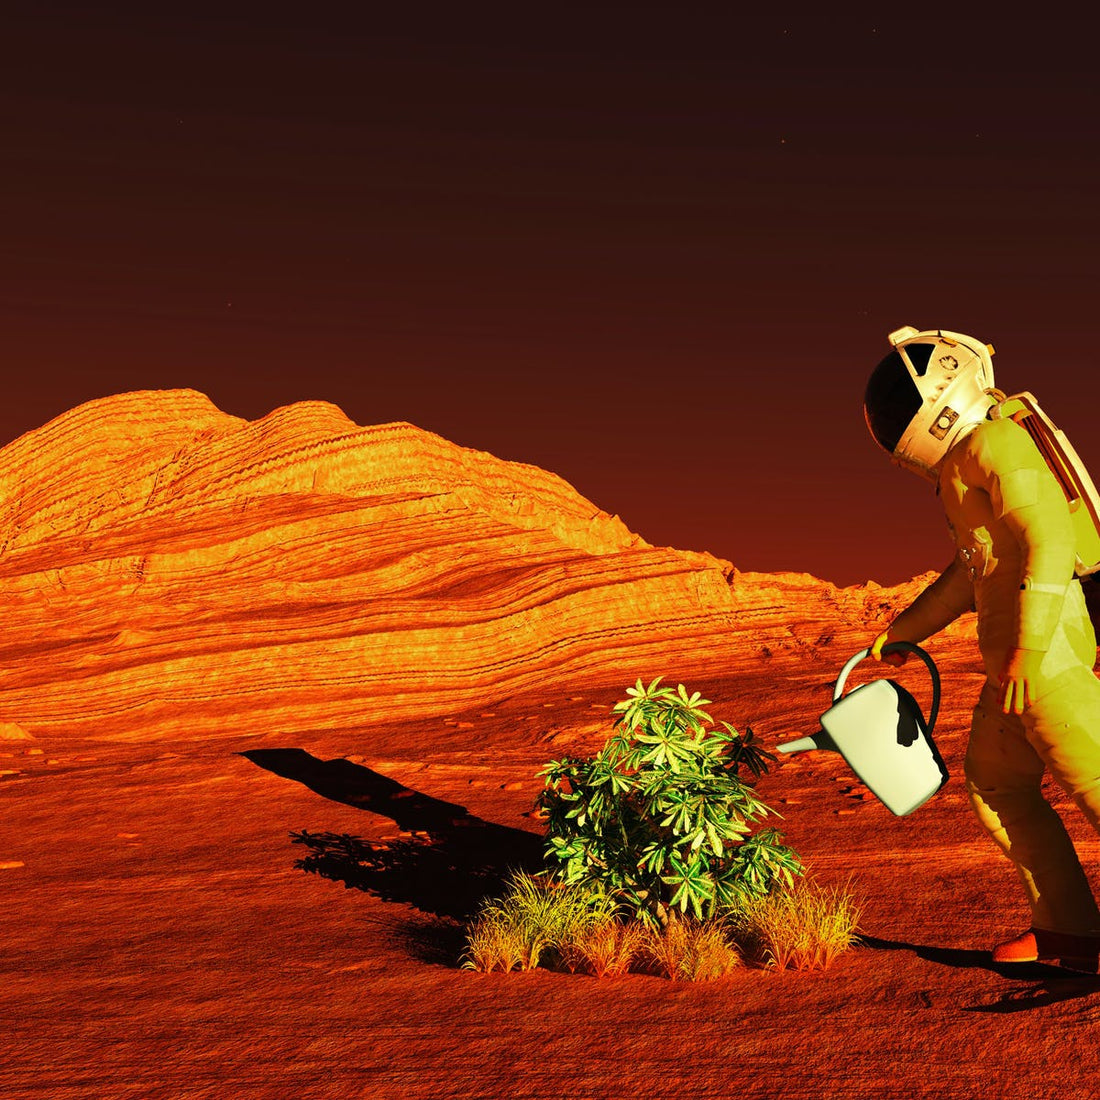 Can We Plant Trees On Mars And Create An Atmosphere?